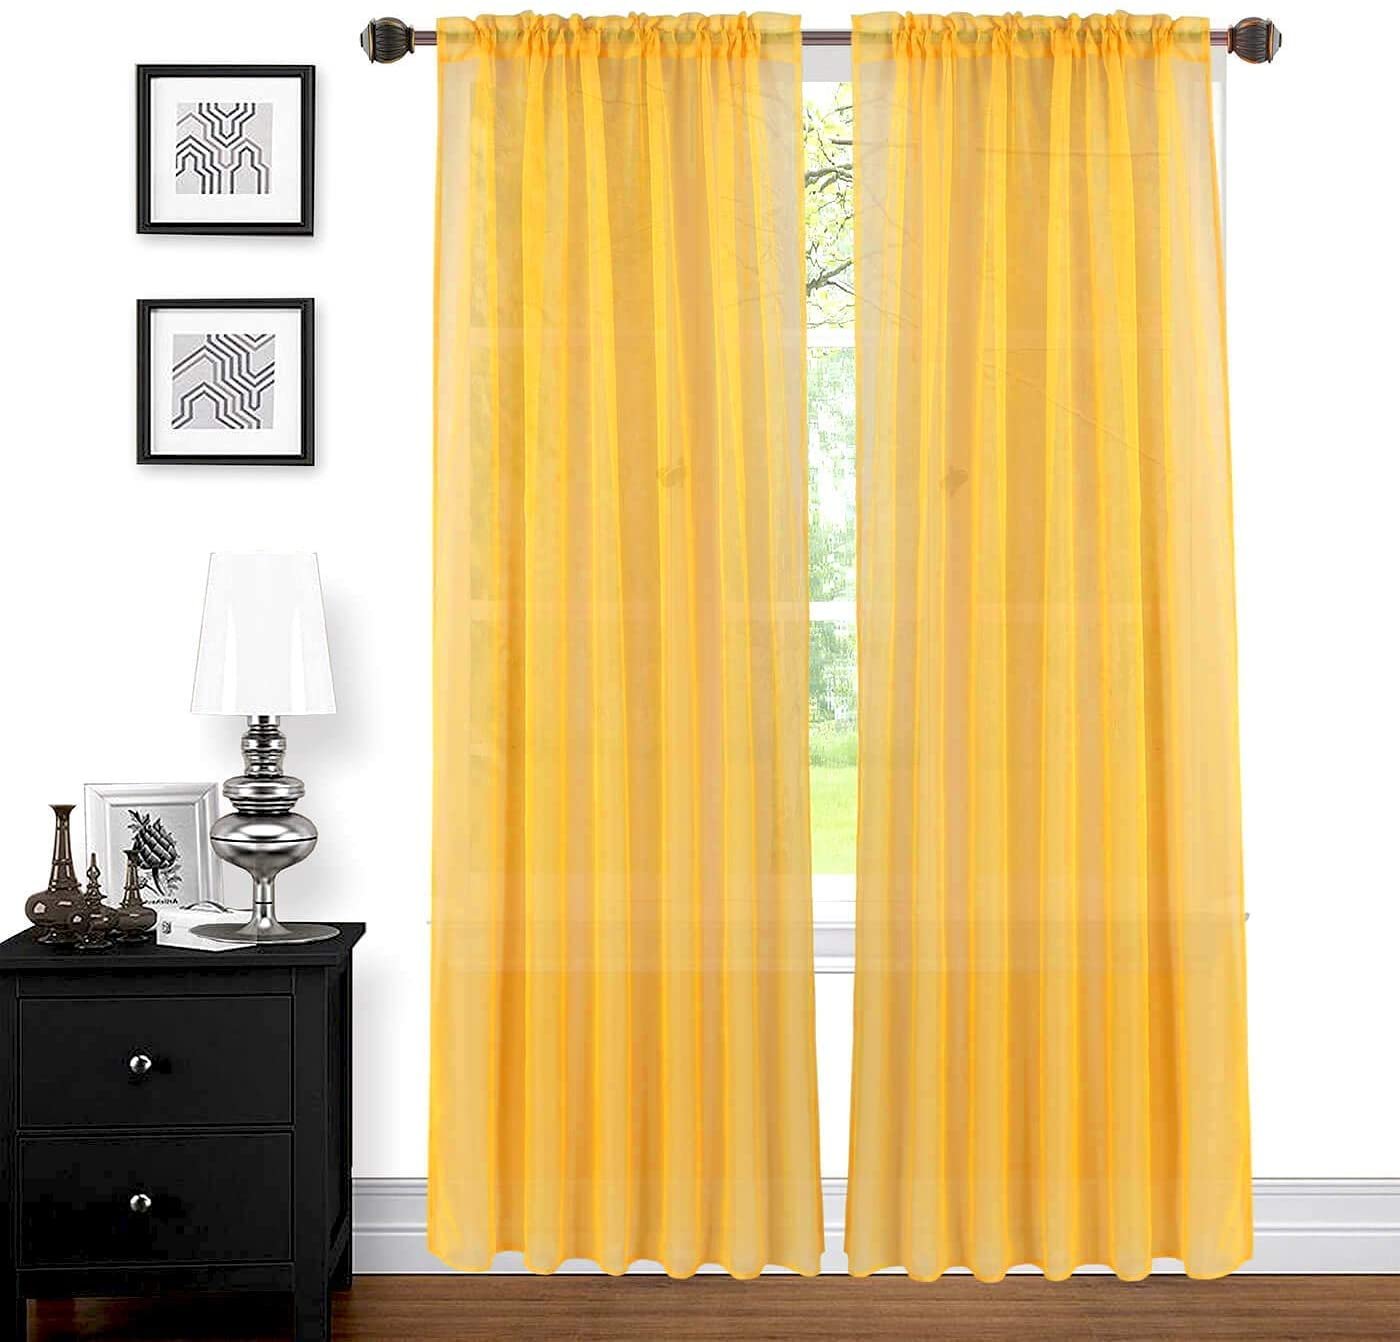 2 Piece Sheer Voile Rod Pocket Window Panel Curtain Drapes Many Sizes & Colors 